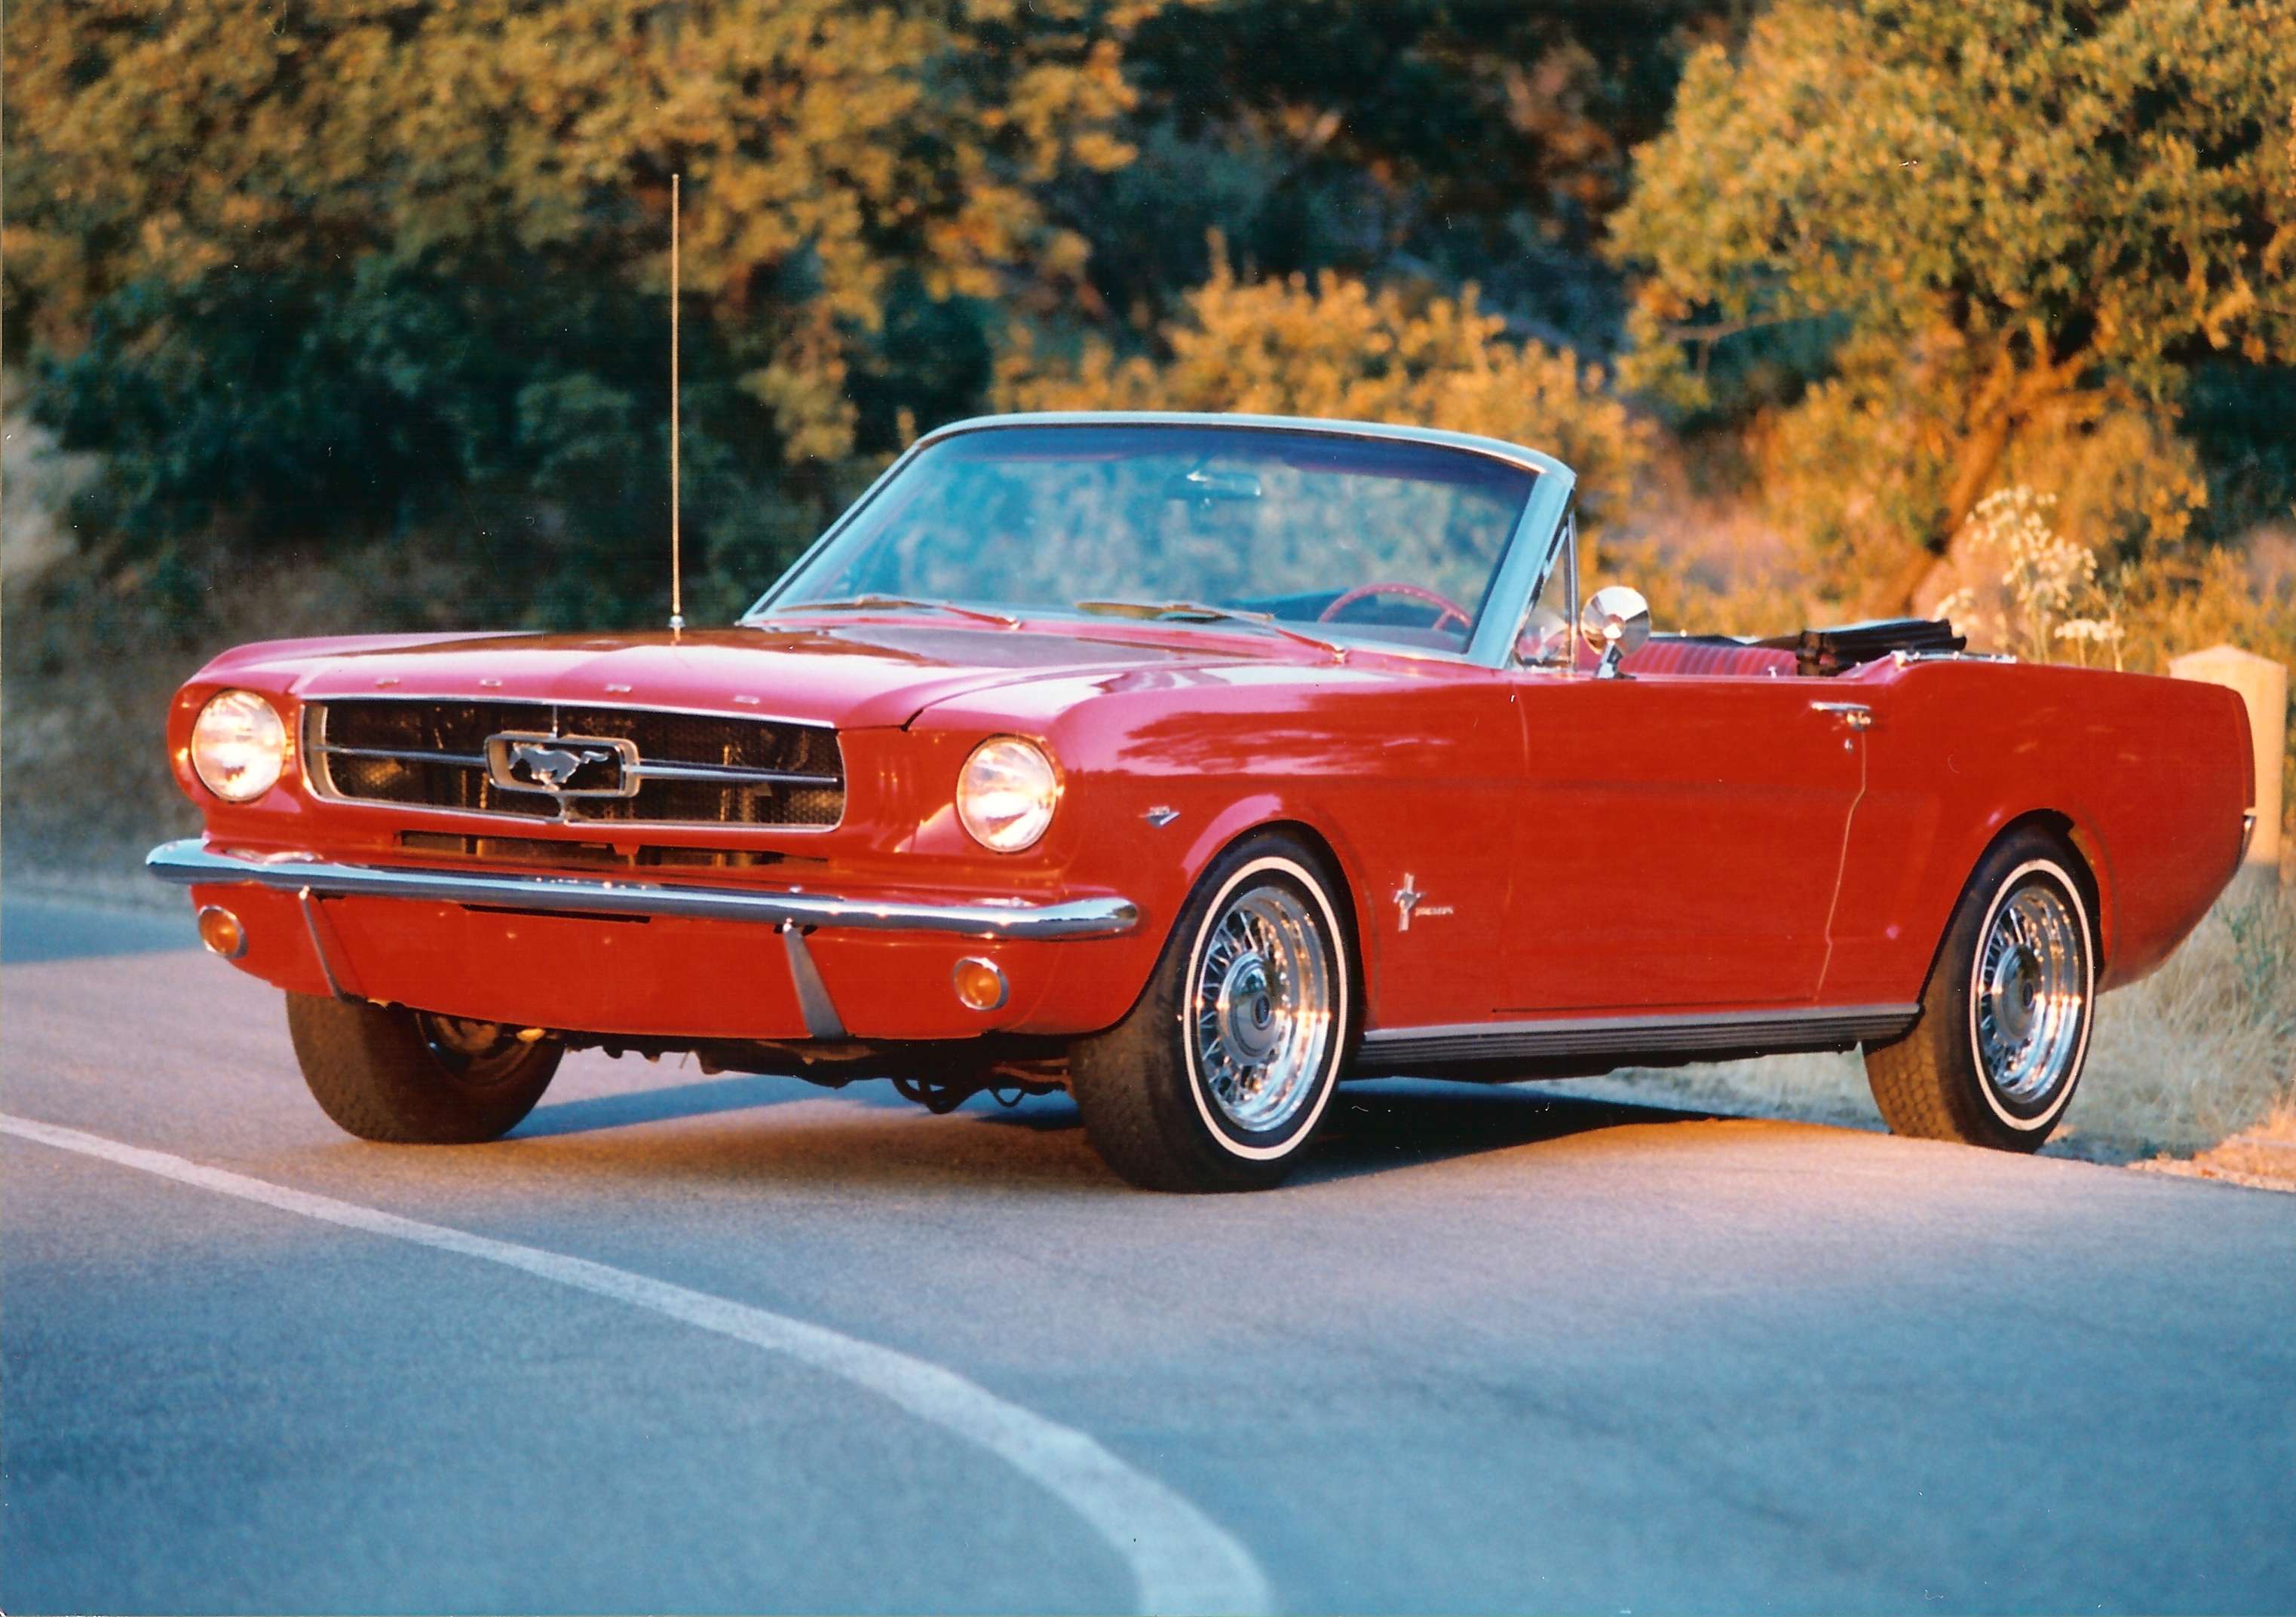 Ford Mustang Cabrio #8416537